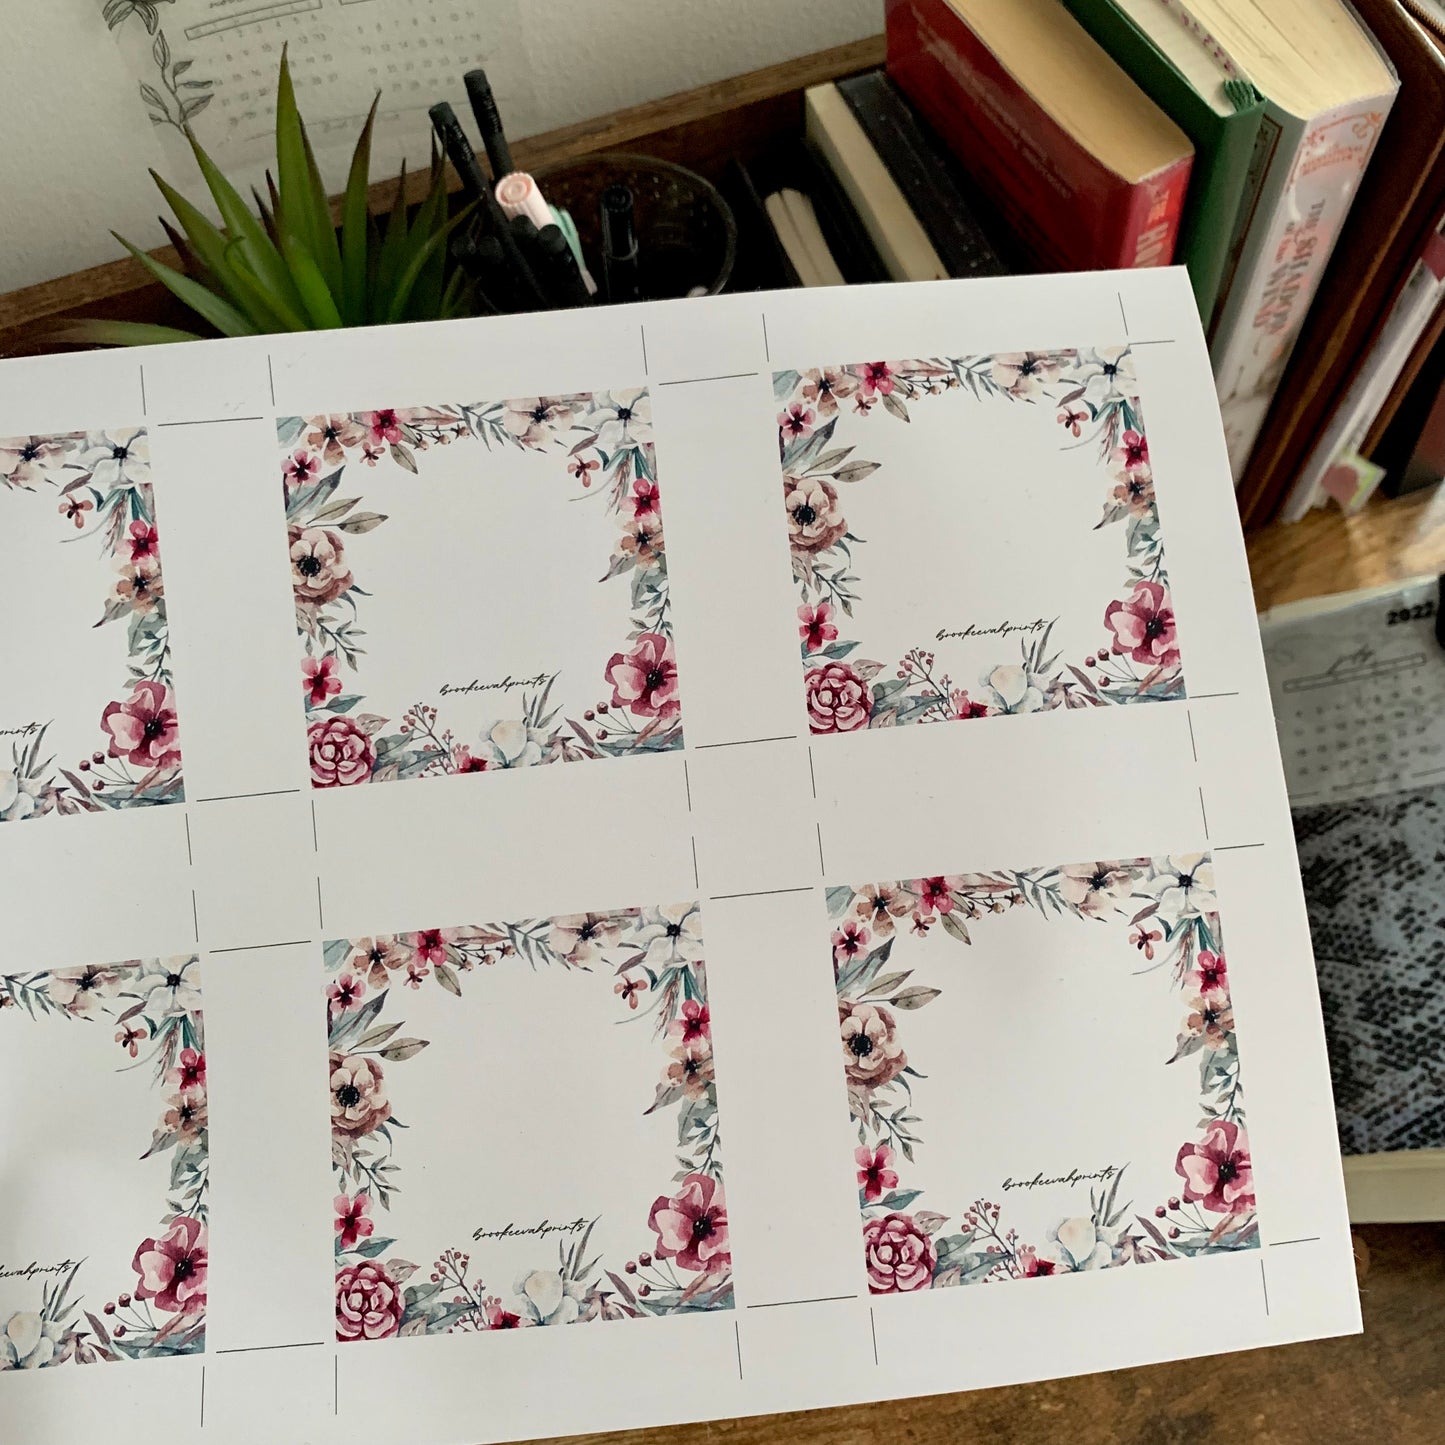 Printable Sticky Notes - Sugar Florals